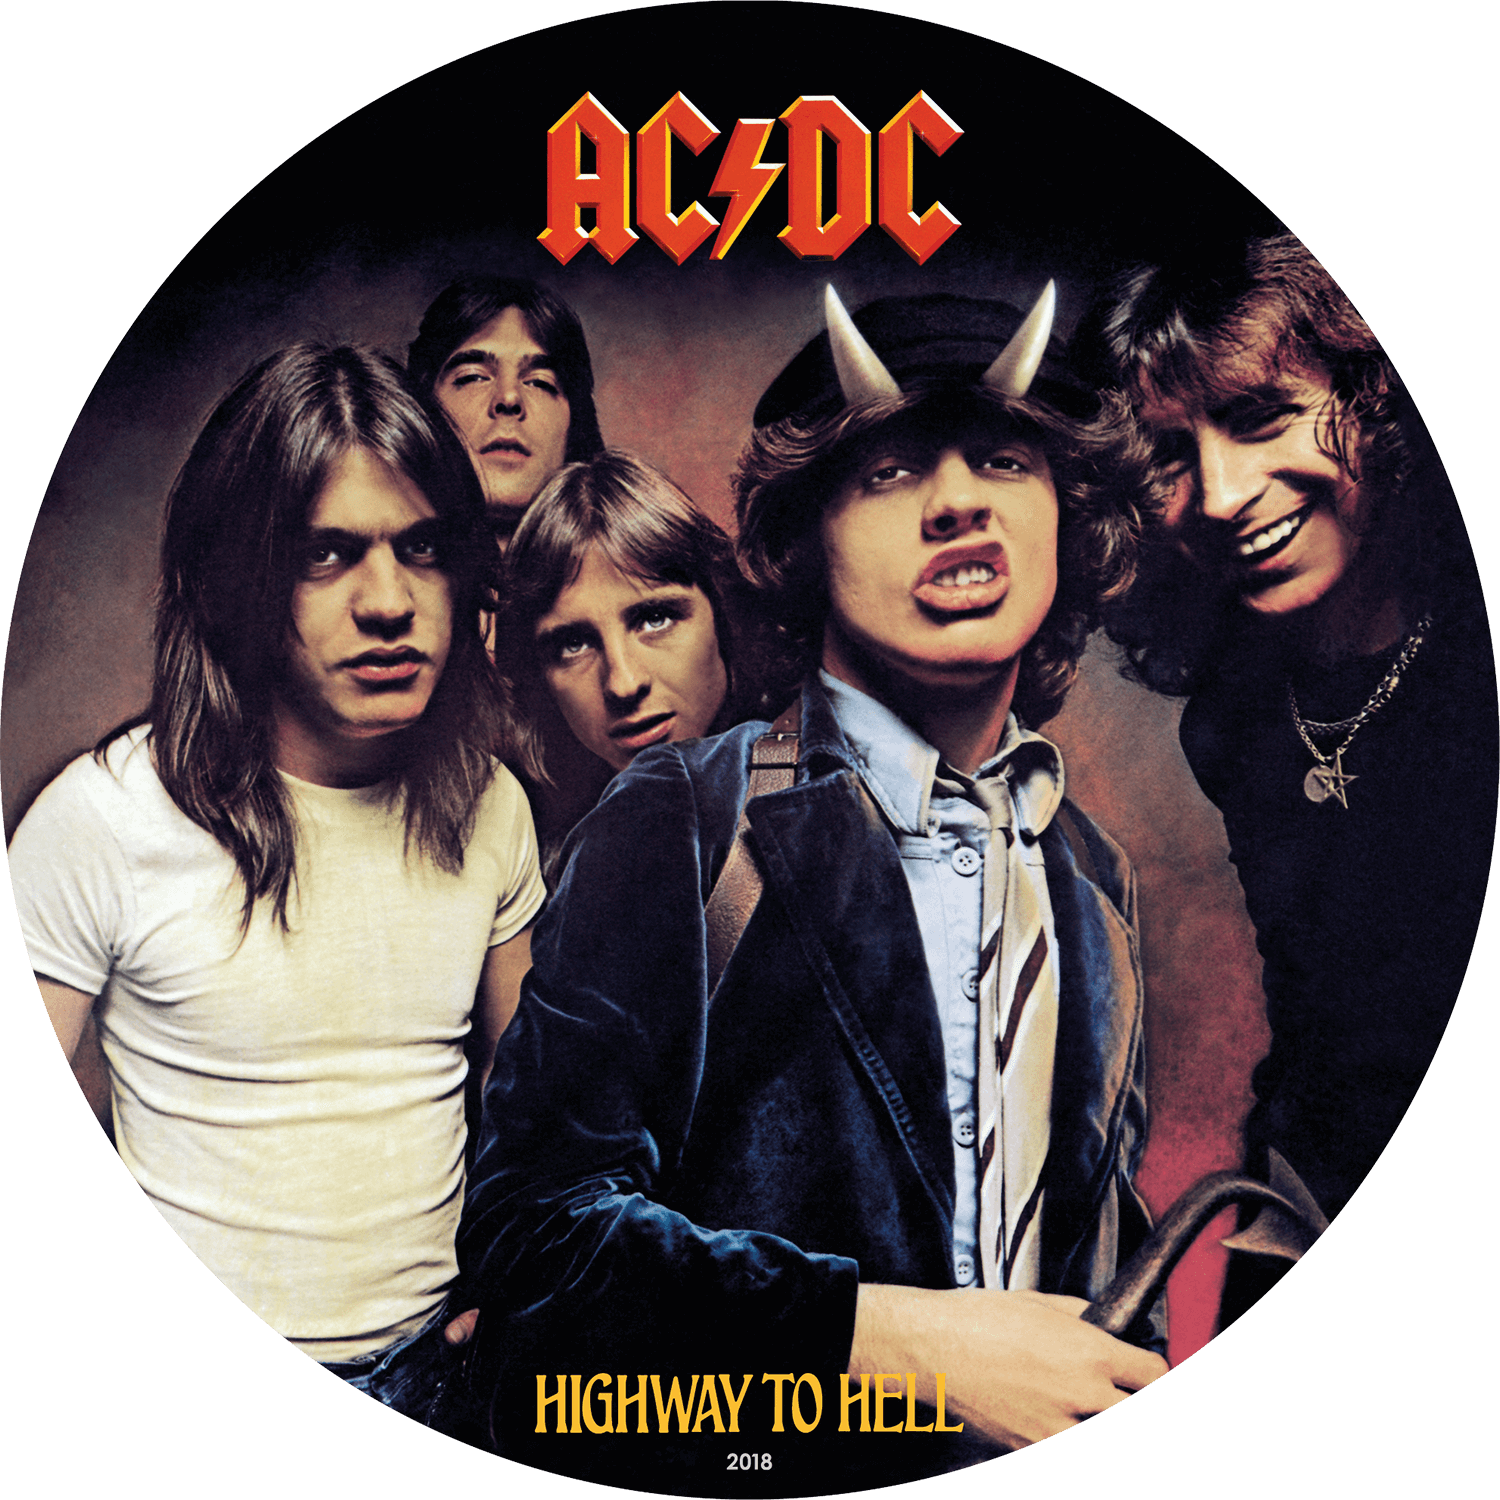 ac-dc-highway-to-hell-coinsweekly